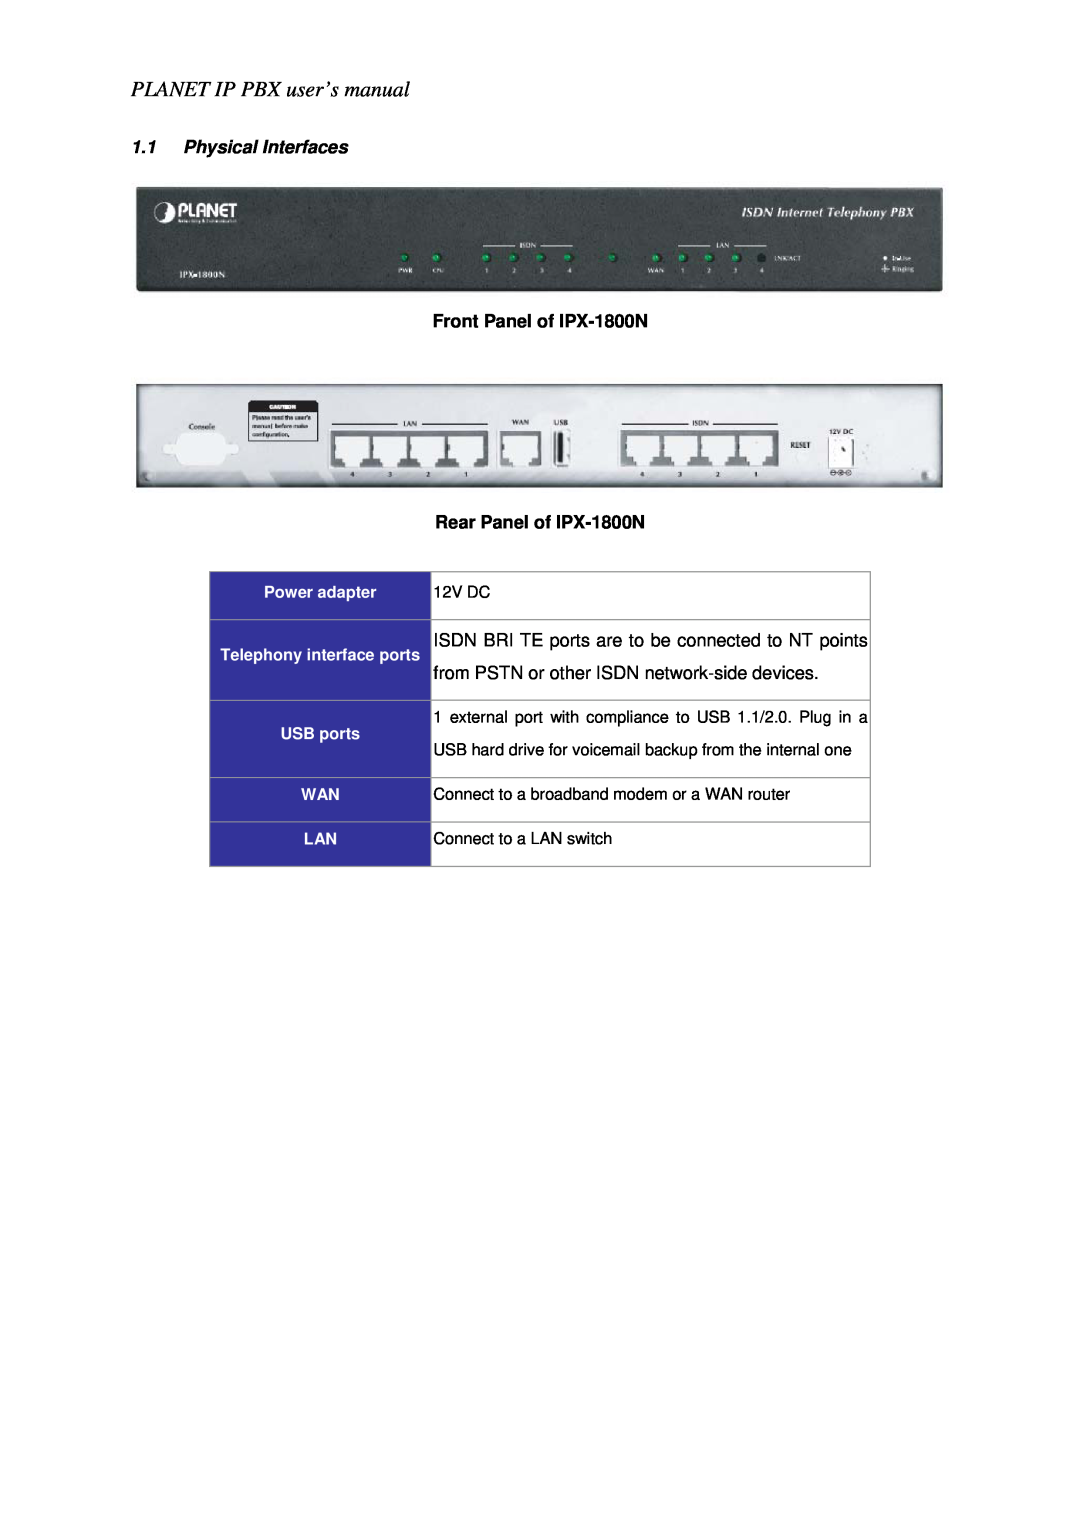 Planet Technology Physical Interfaces, Front Panel of IPX-1800N, Rear Panel of IPX-1800N, PLANET IP PBX user’s manual 